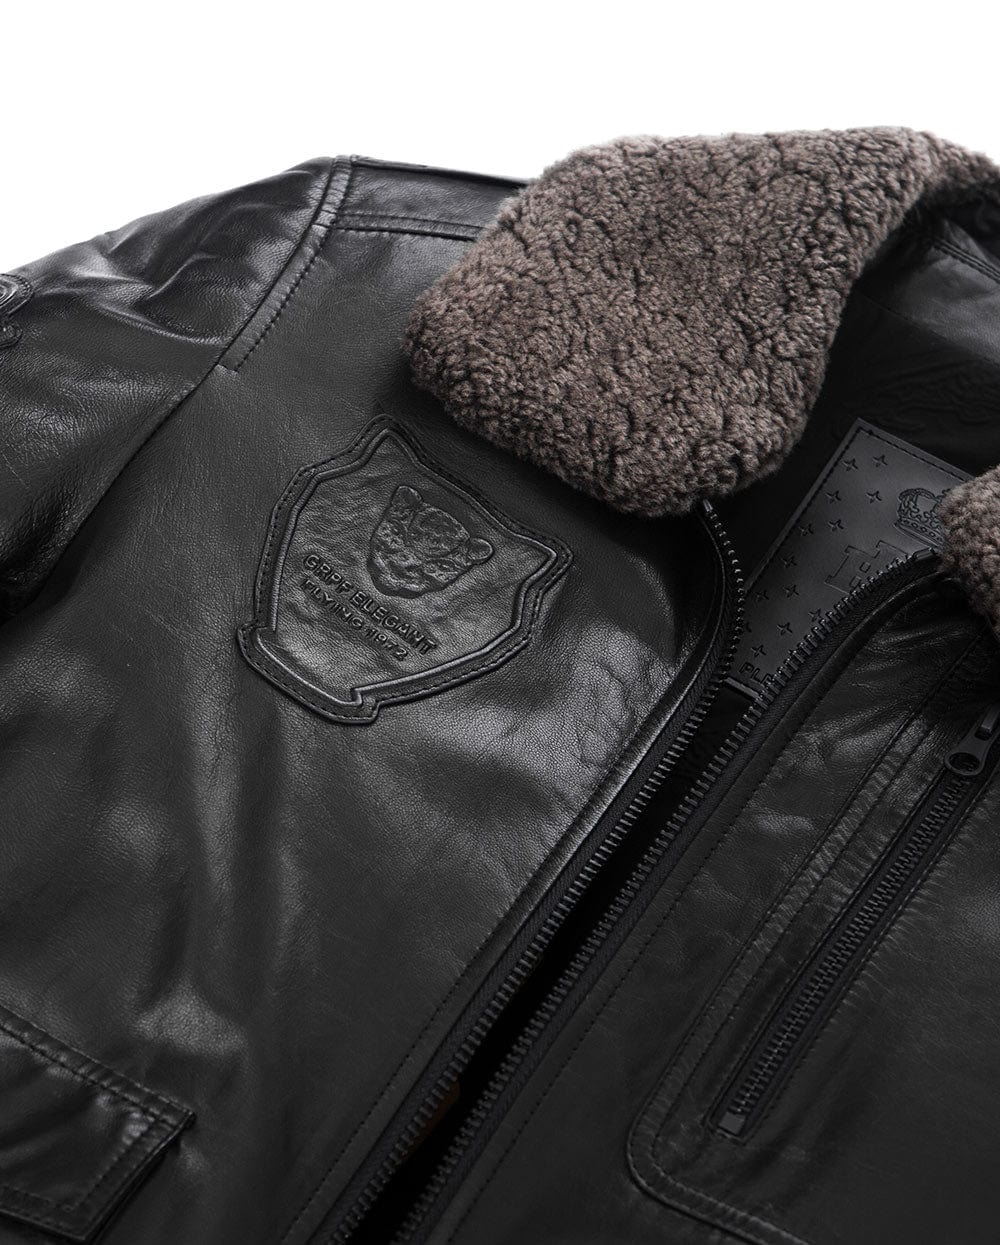 Black Wool Fur Collar Patched Leather Bomber Jacket